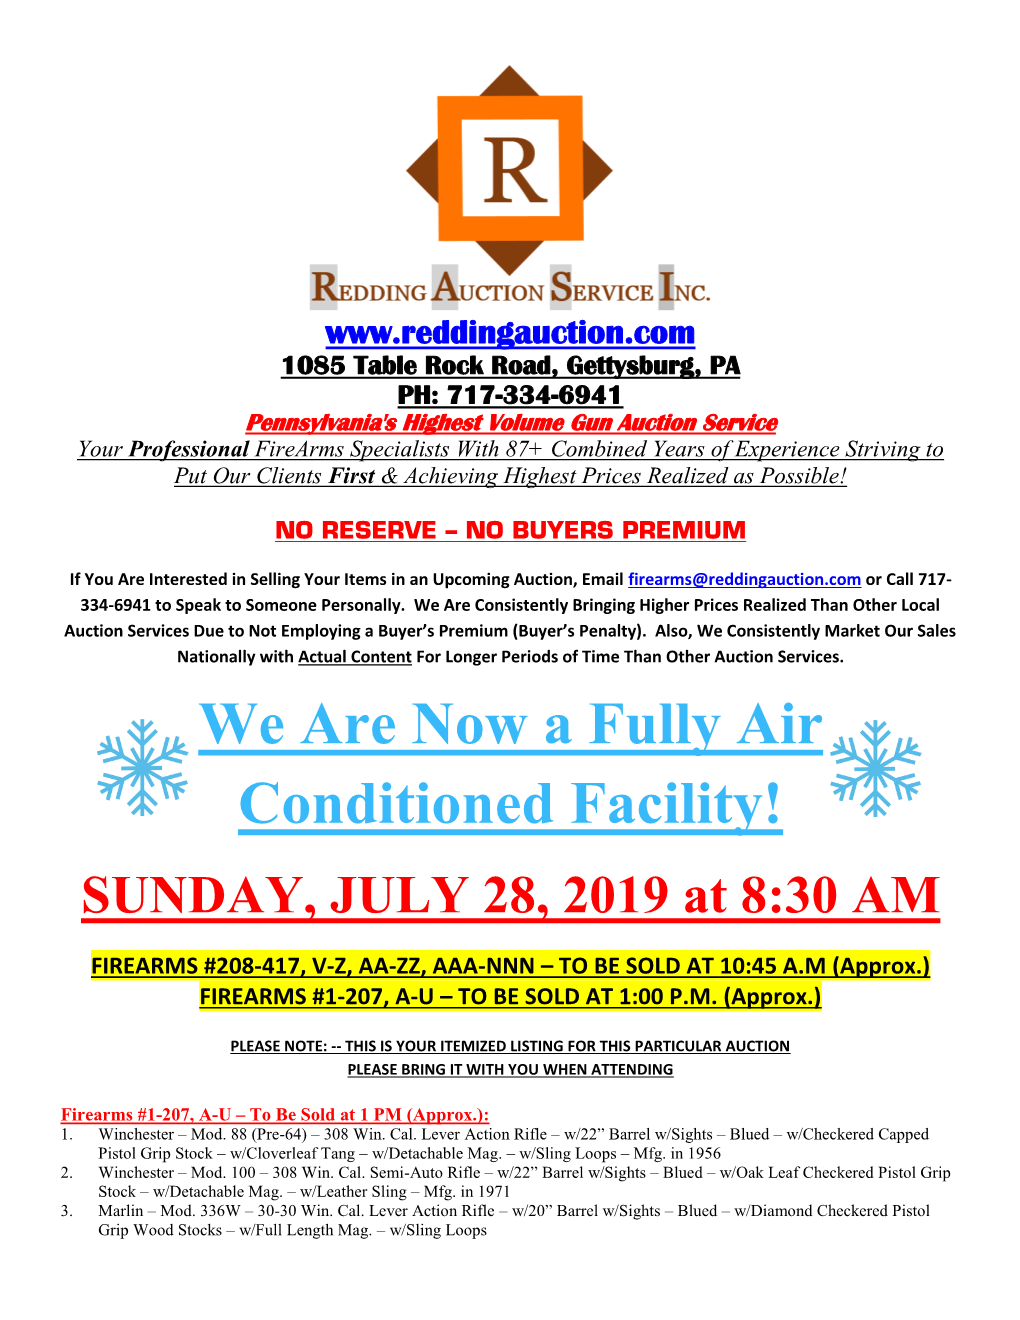 We Are Now a Fully Air Conditioned Facility! SUNDAY, JULY 28, 2019 at 8:30 AM